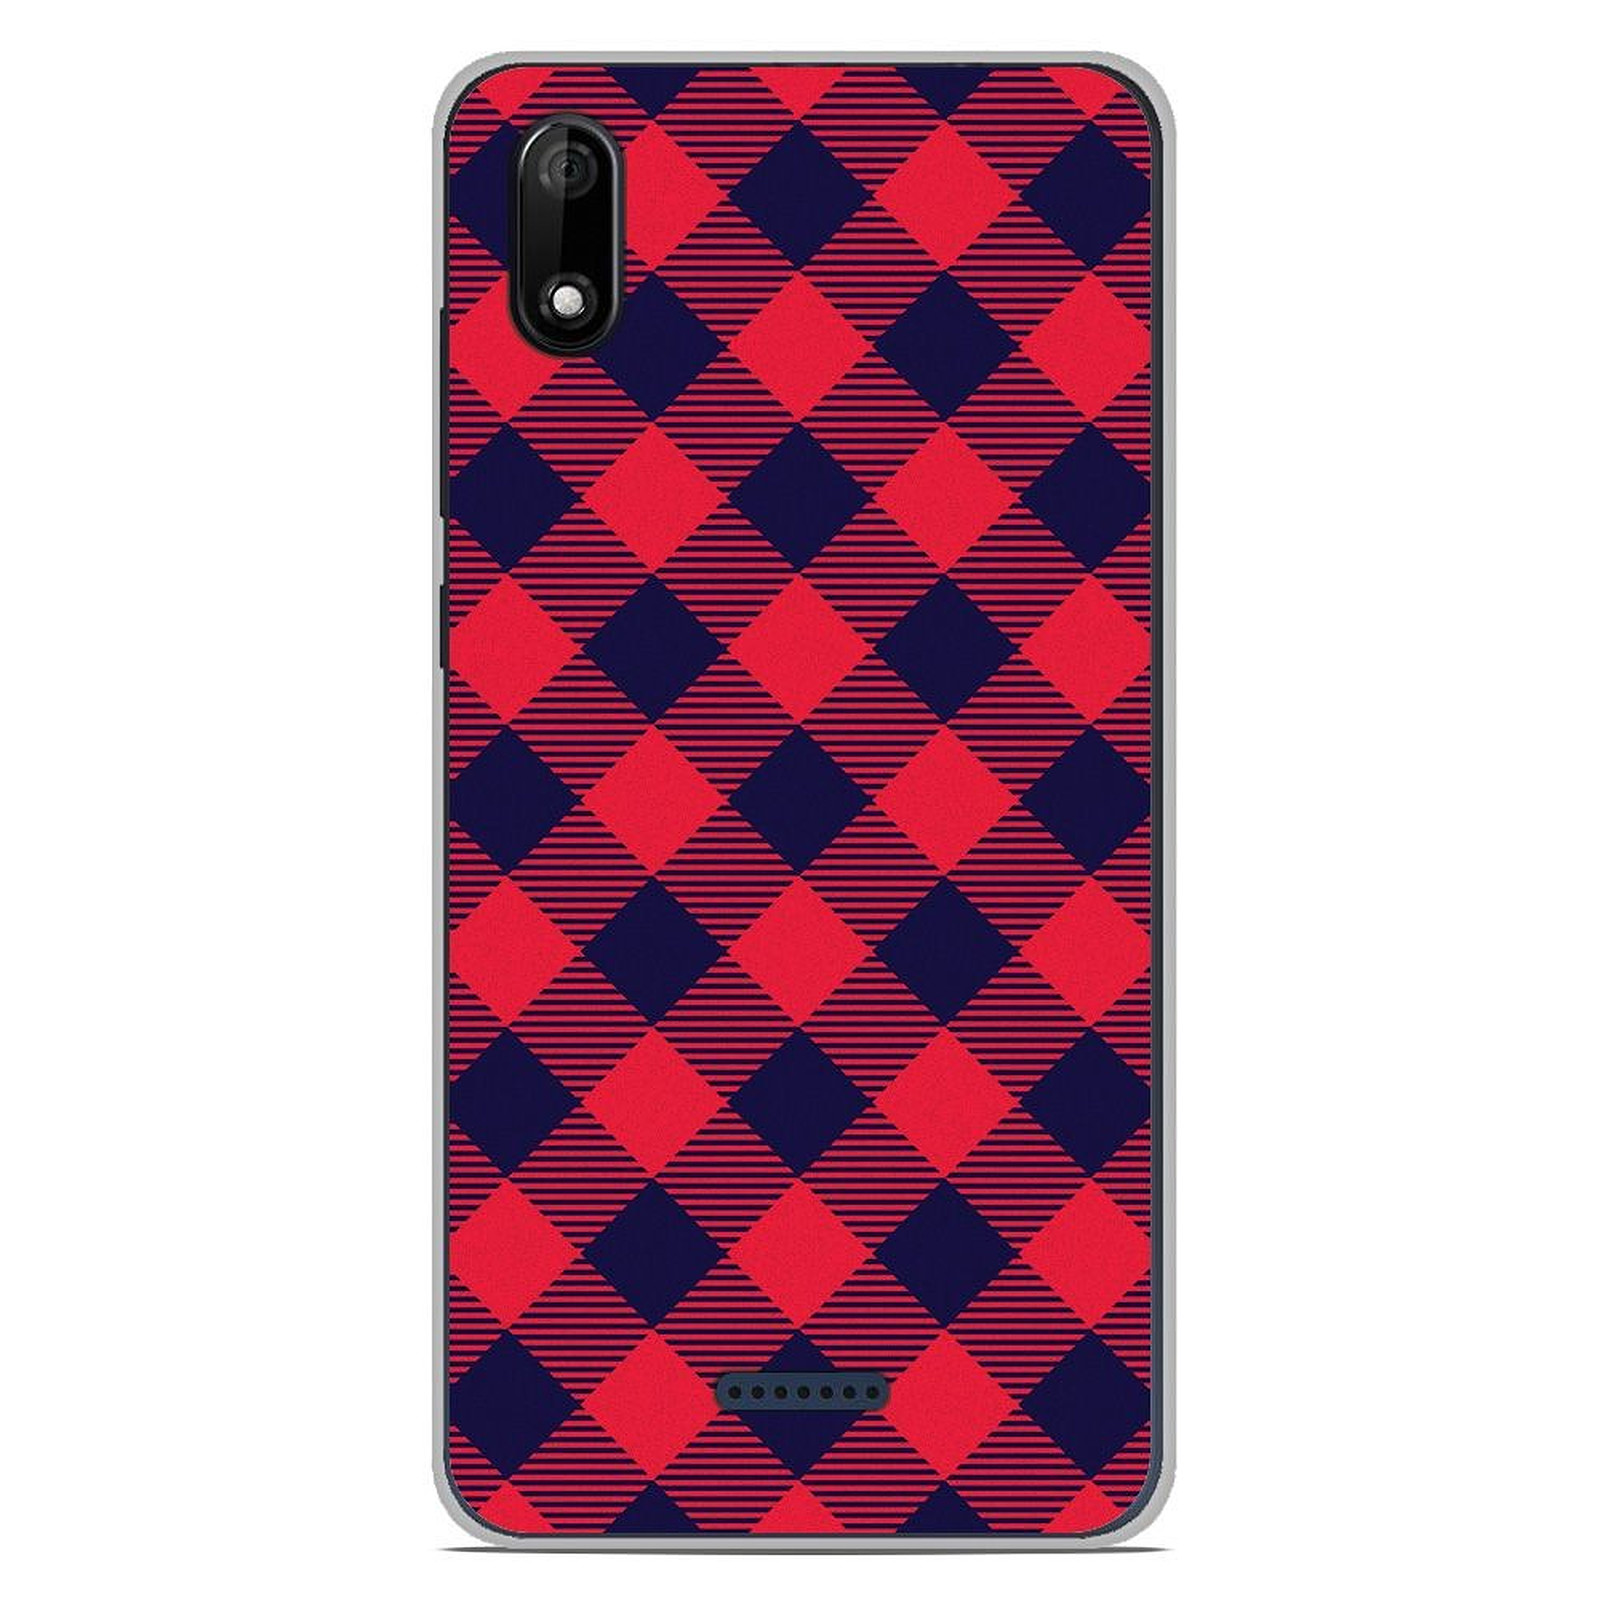 1001 Coques Coque silicone gel Wiko Y60 motif Tartan Rouge - Coque telephone 1001Coques